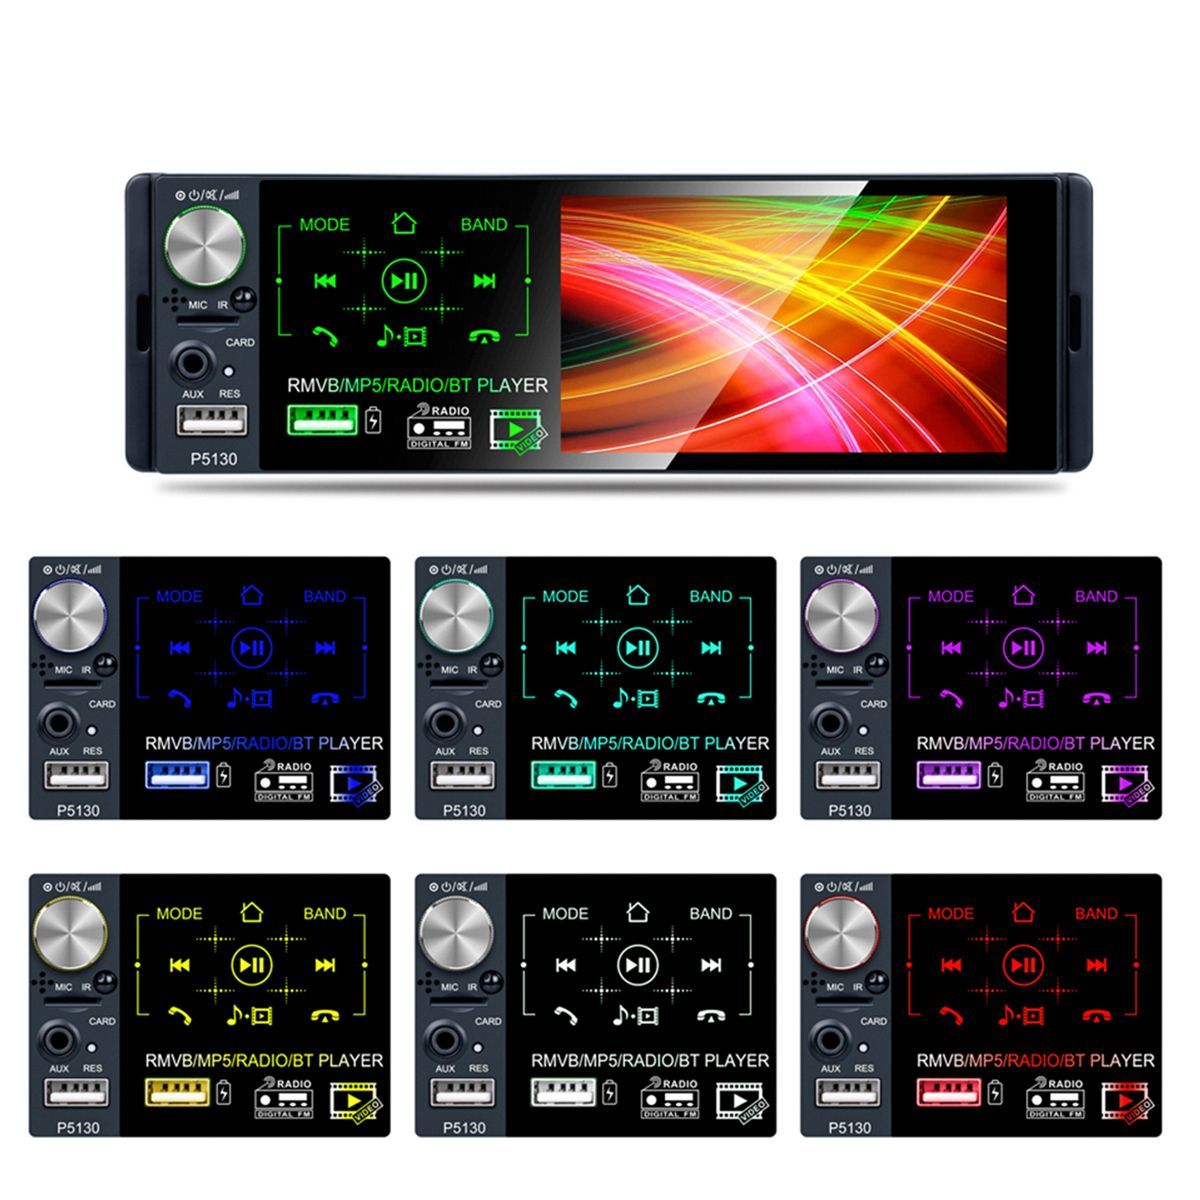 P5130-41Inch-1DIN-Car-Stereo-Radio-MP5-Player-Full-Touch-Screen-FM-AM-RDS-bluetooth-USB-Strong-Bass--1649564